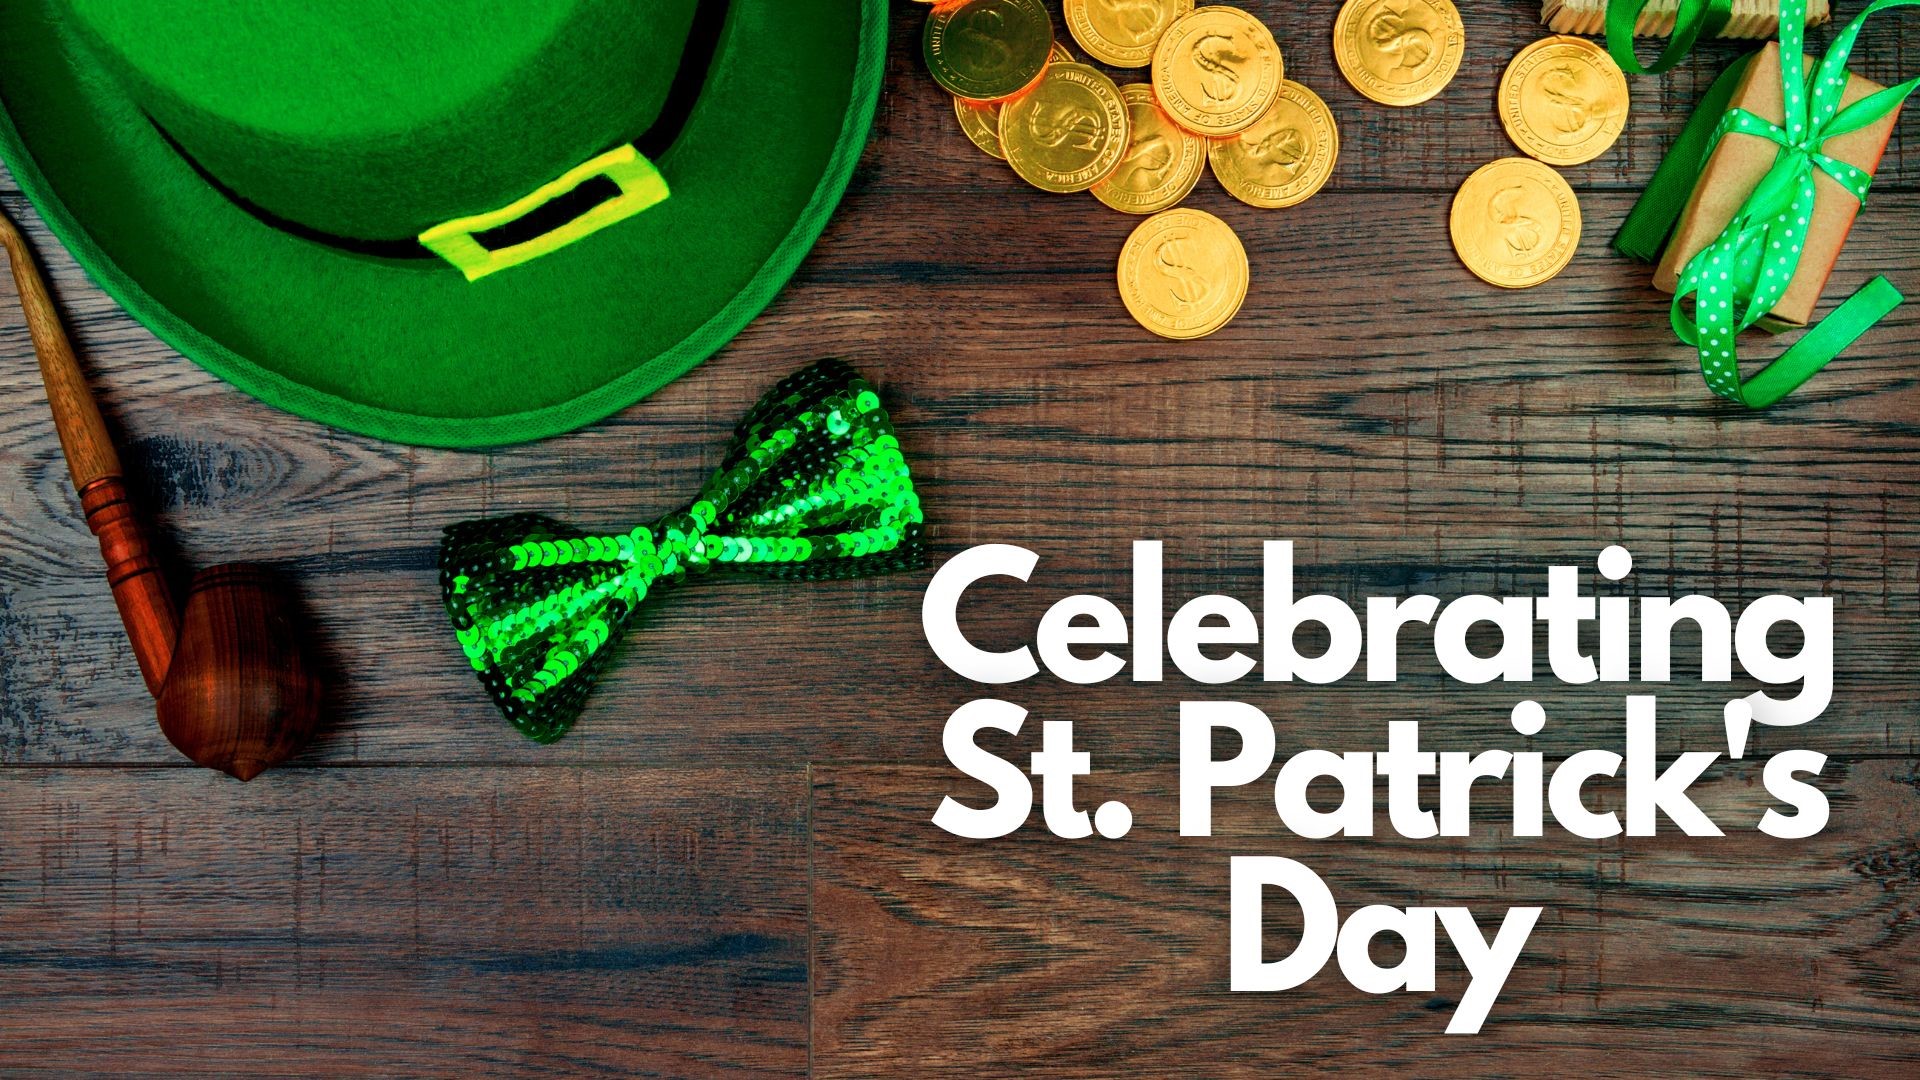 A look at how St. Patrick's day is celebrated around the US, as well as explaining some little known facts about the holiday and its patron saint.